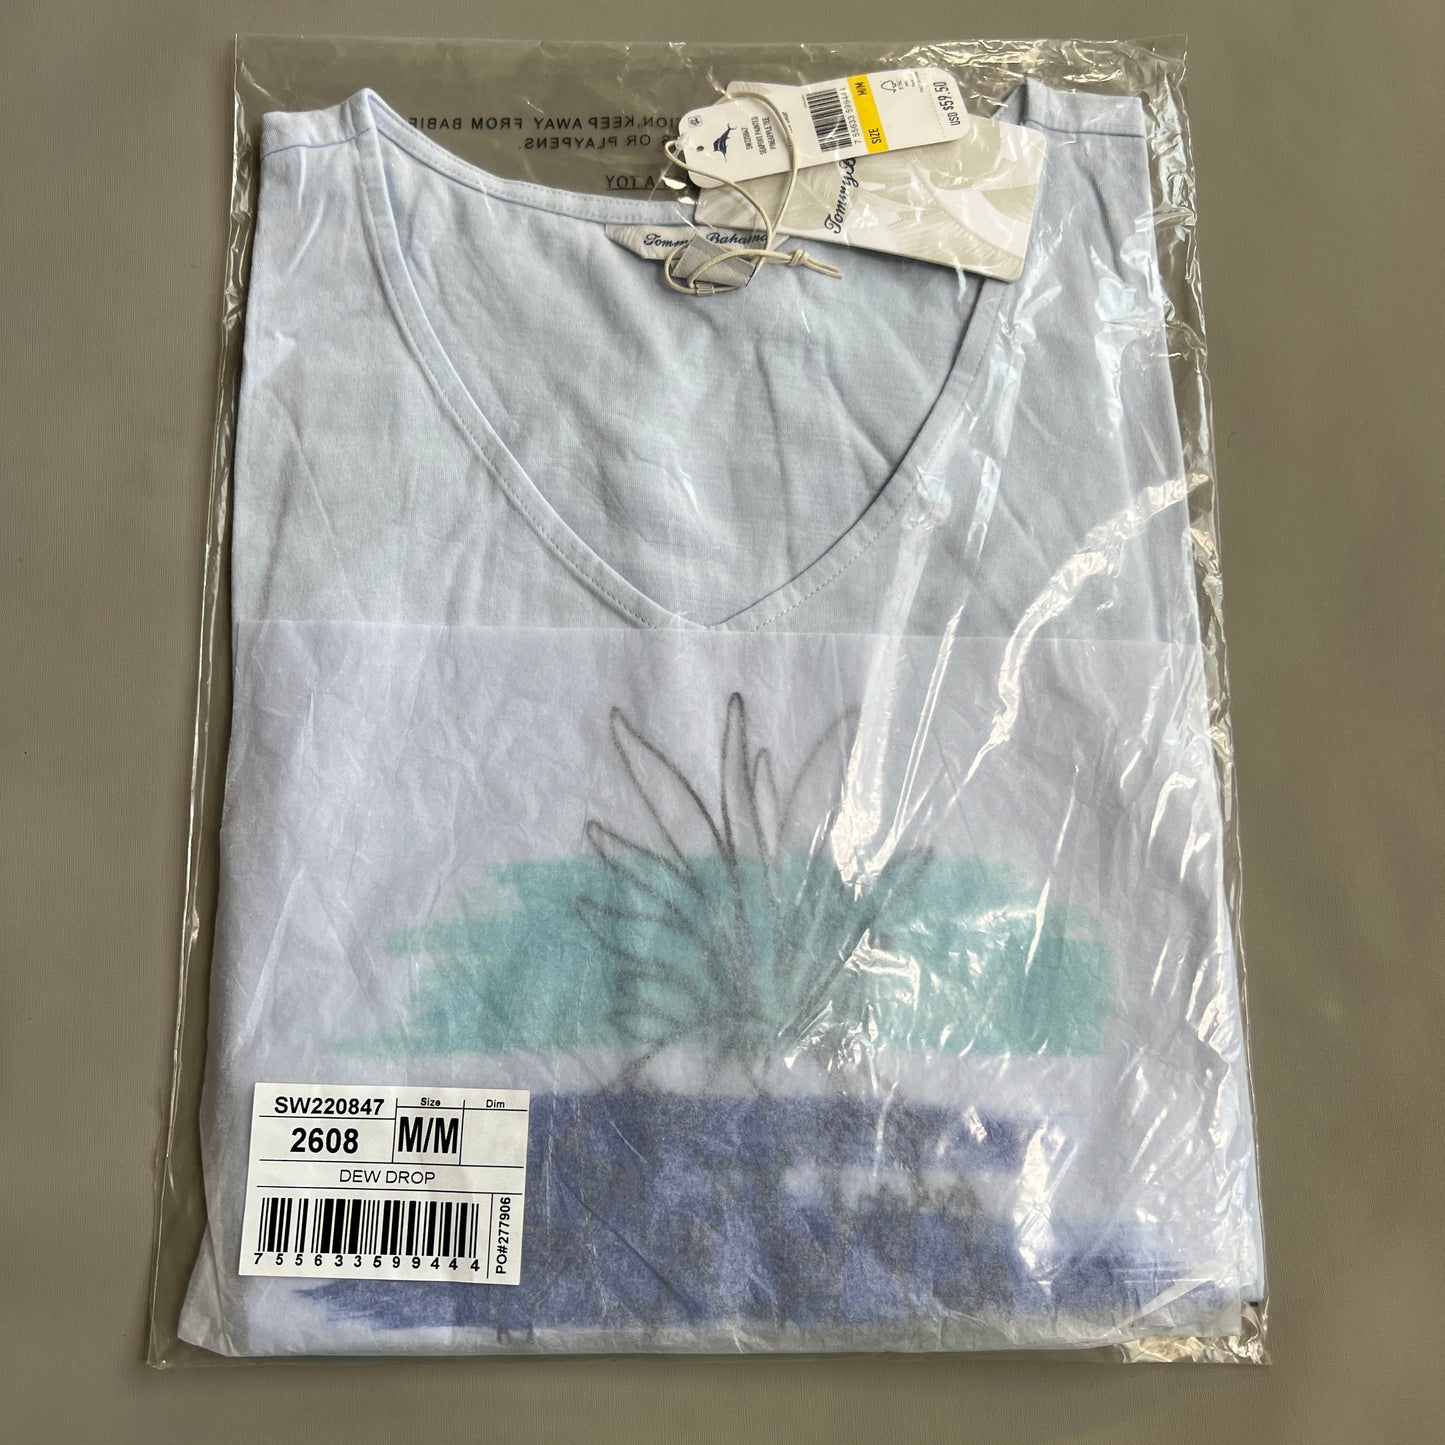 TOMMY BAHAMA Women's Seaport Painted Pineapple Tee T-shirt Dew Drop Size M (New)